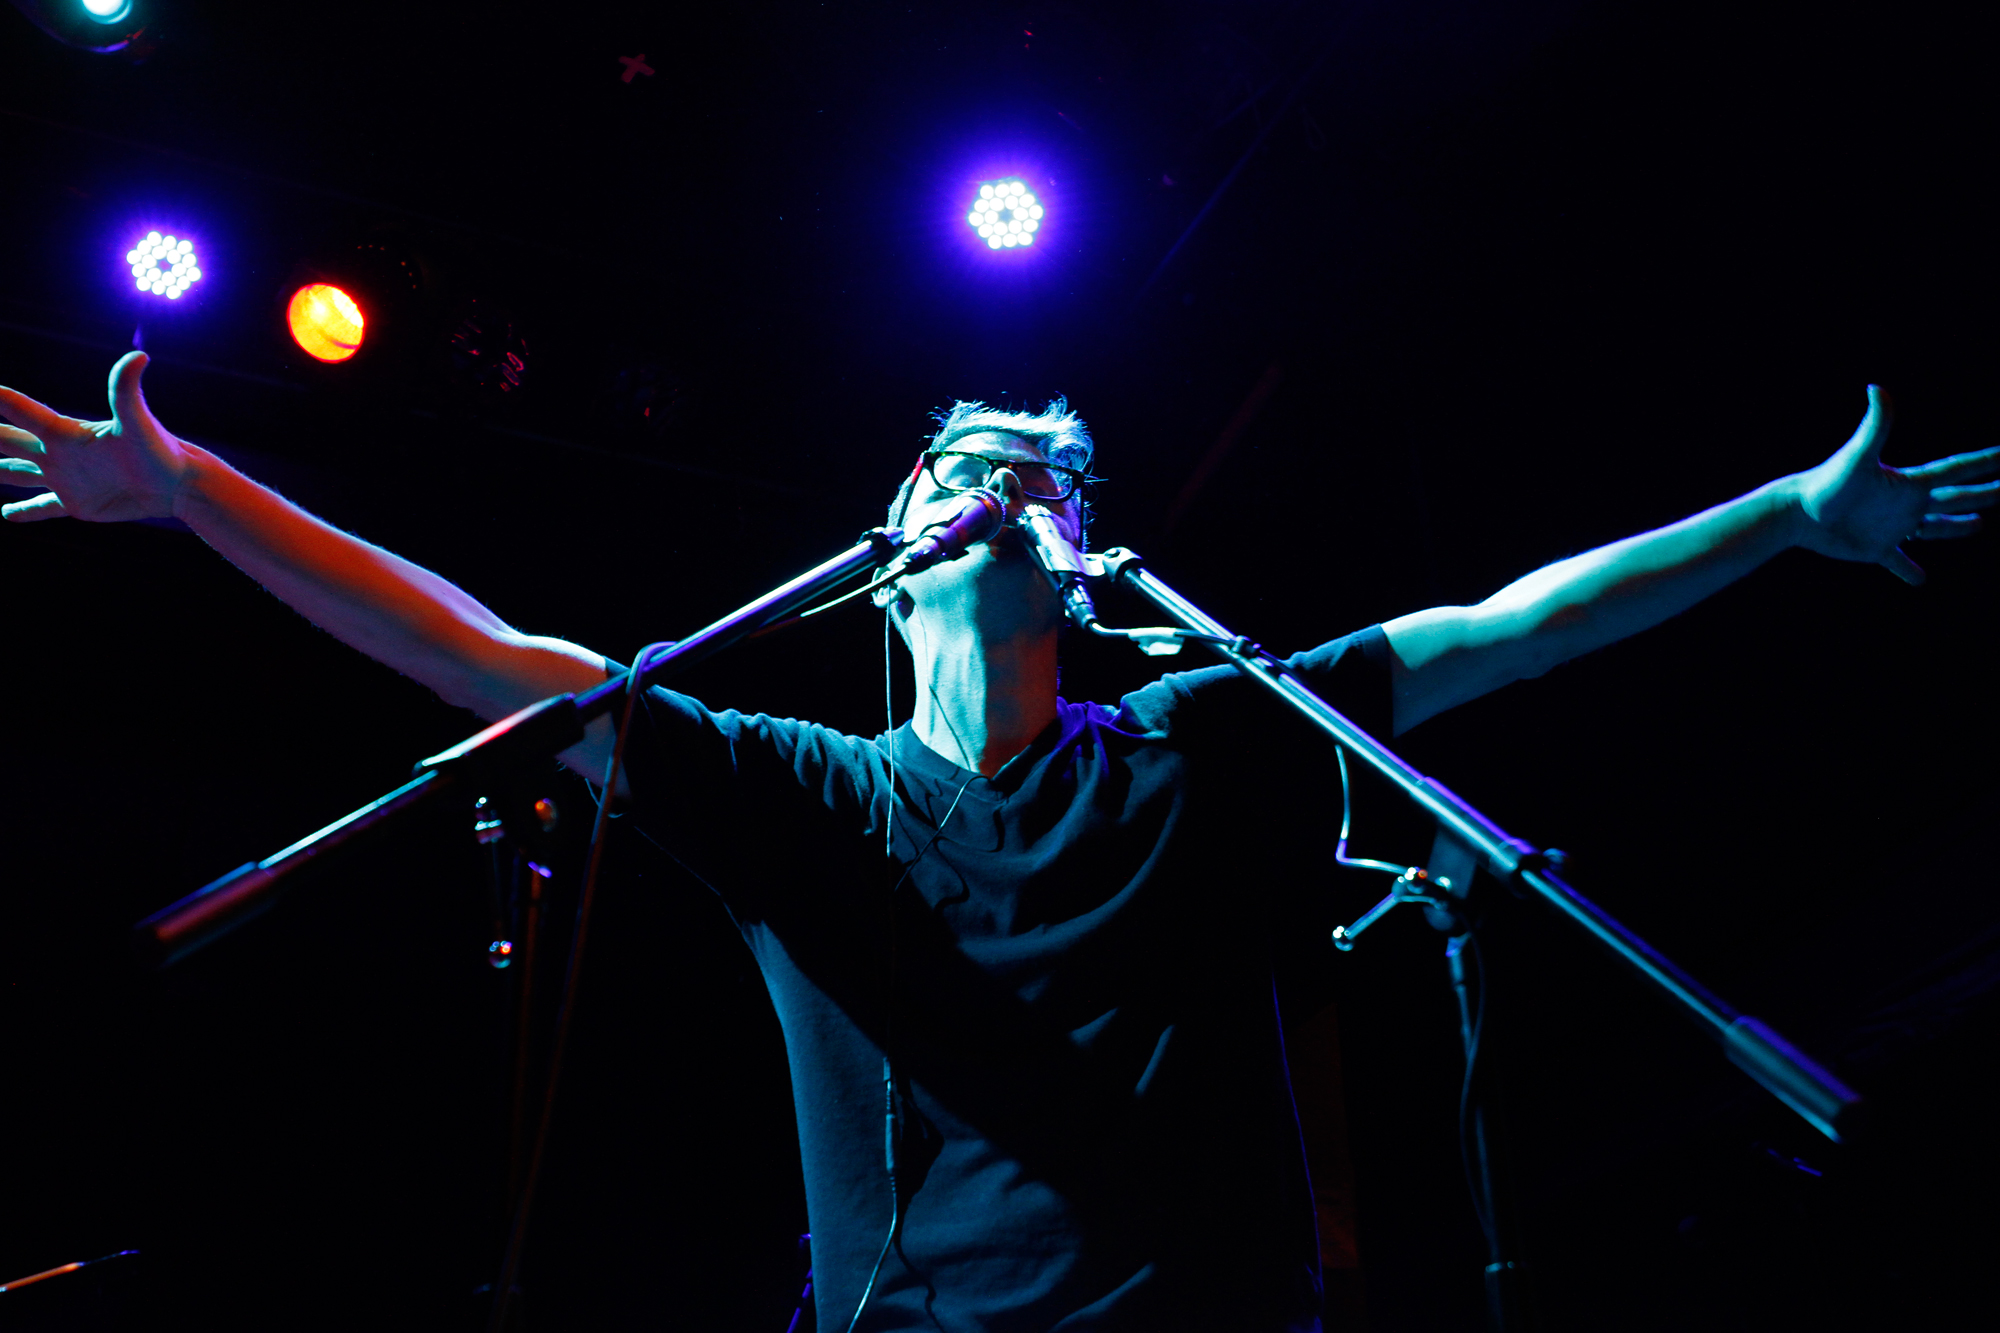 Son Lux plays at Bowery Ballroom in New York, NY on Feb. 7, 2014.